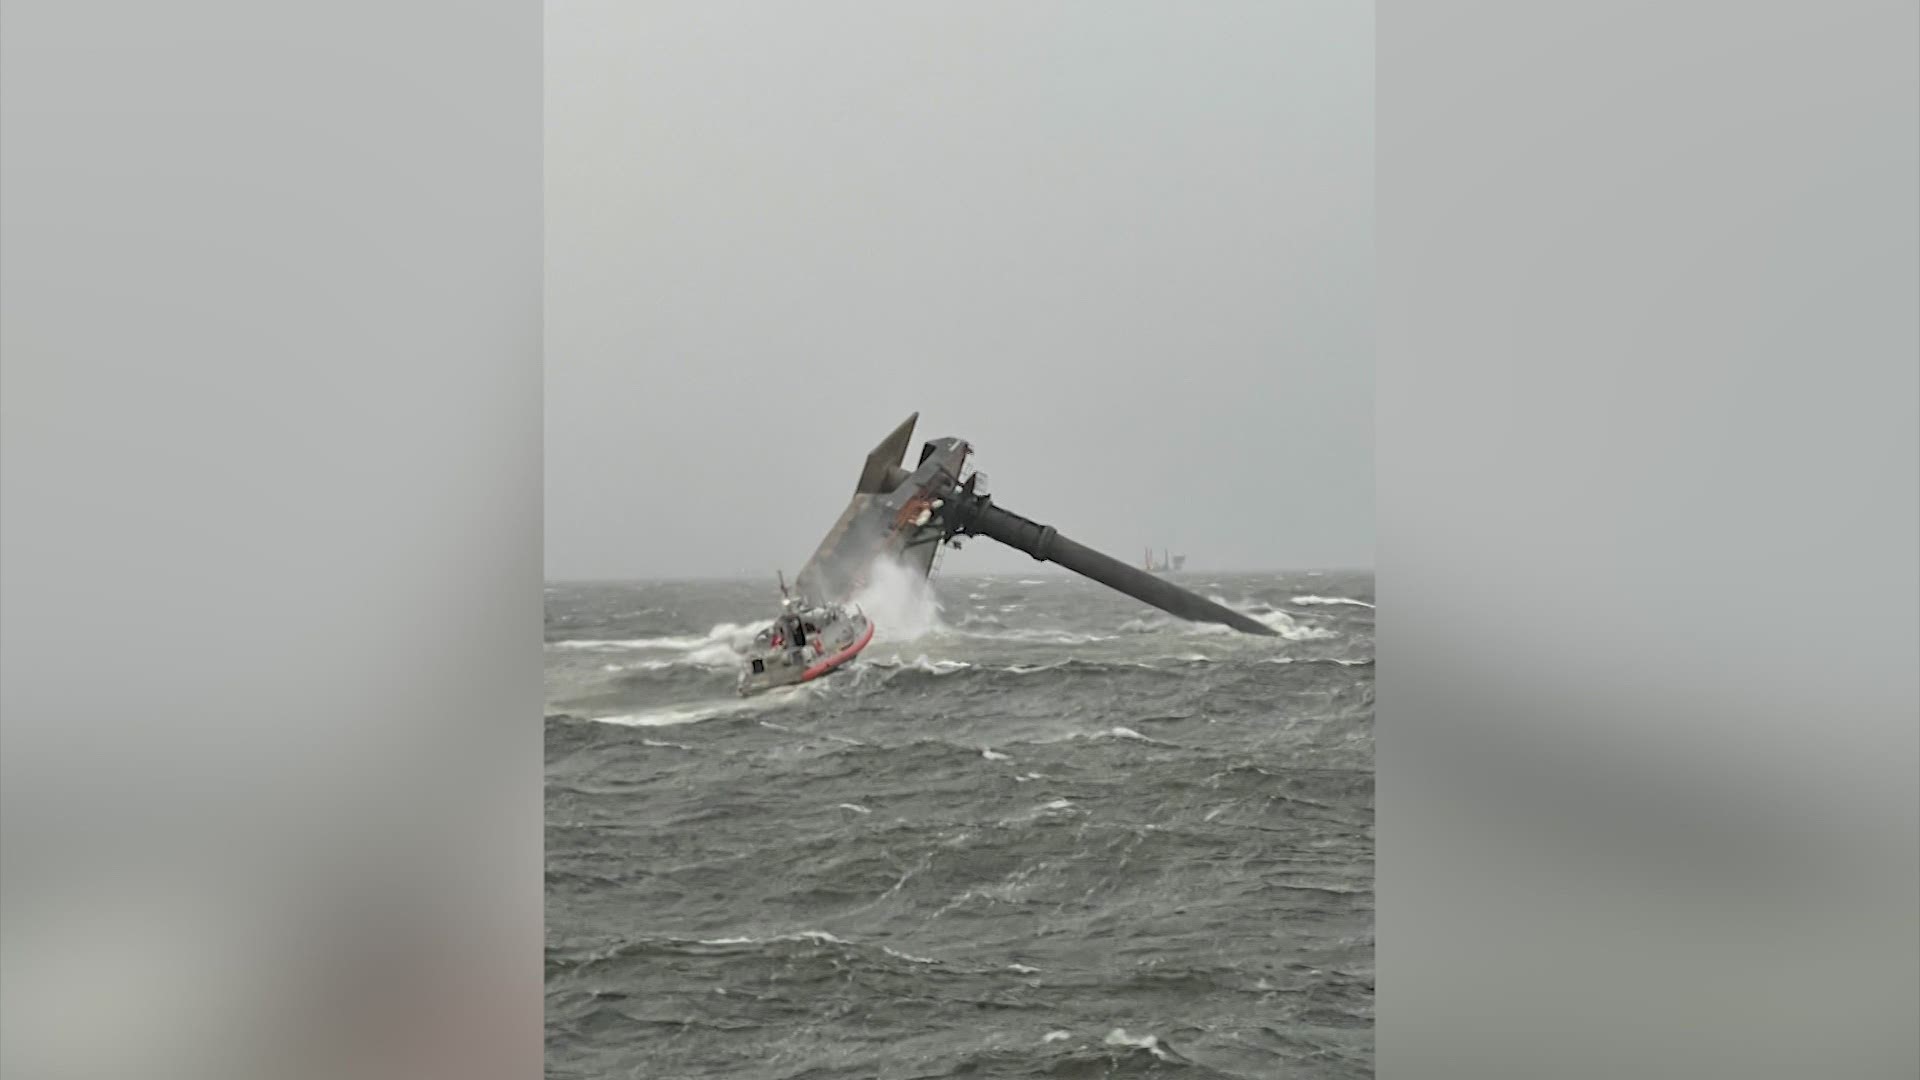 Six of the 19 people onboard a 129-foot commercial liftboat that capsized off the Louisiana coast Tuesday afternoon in rugged seas have been rescued so far